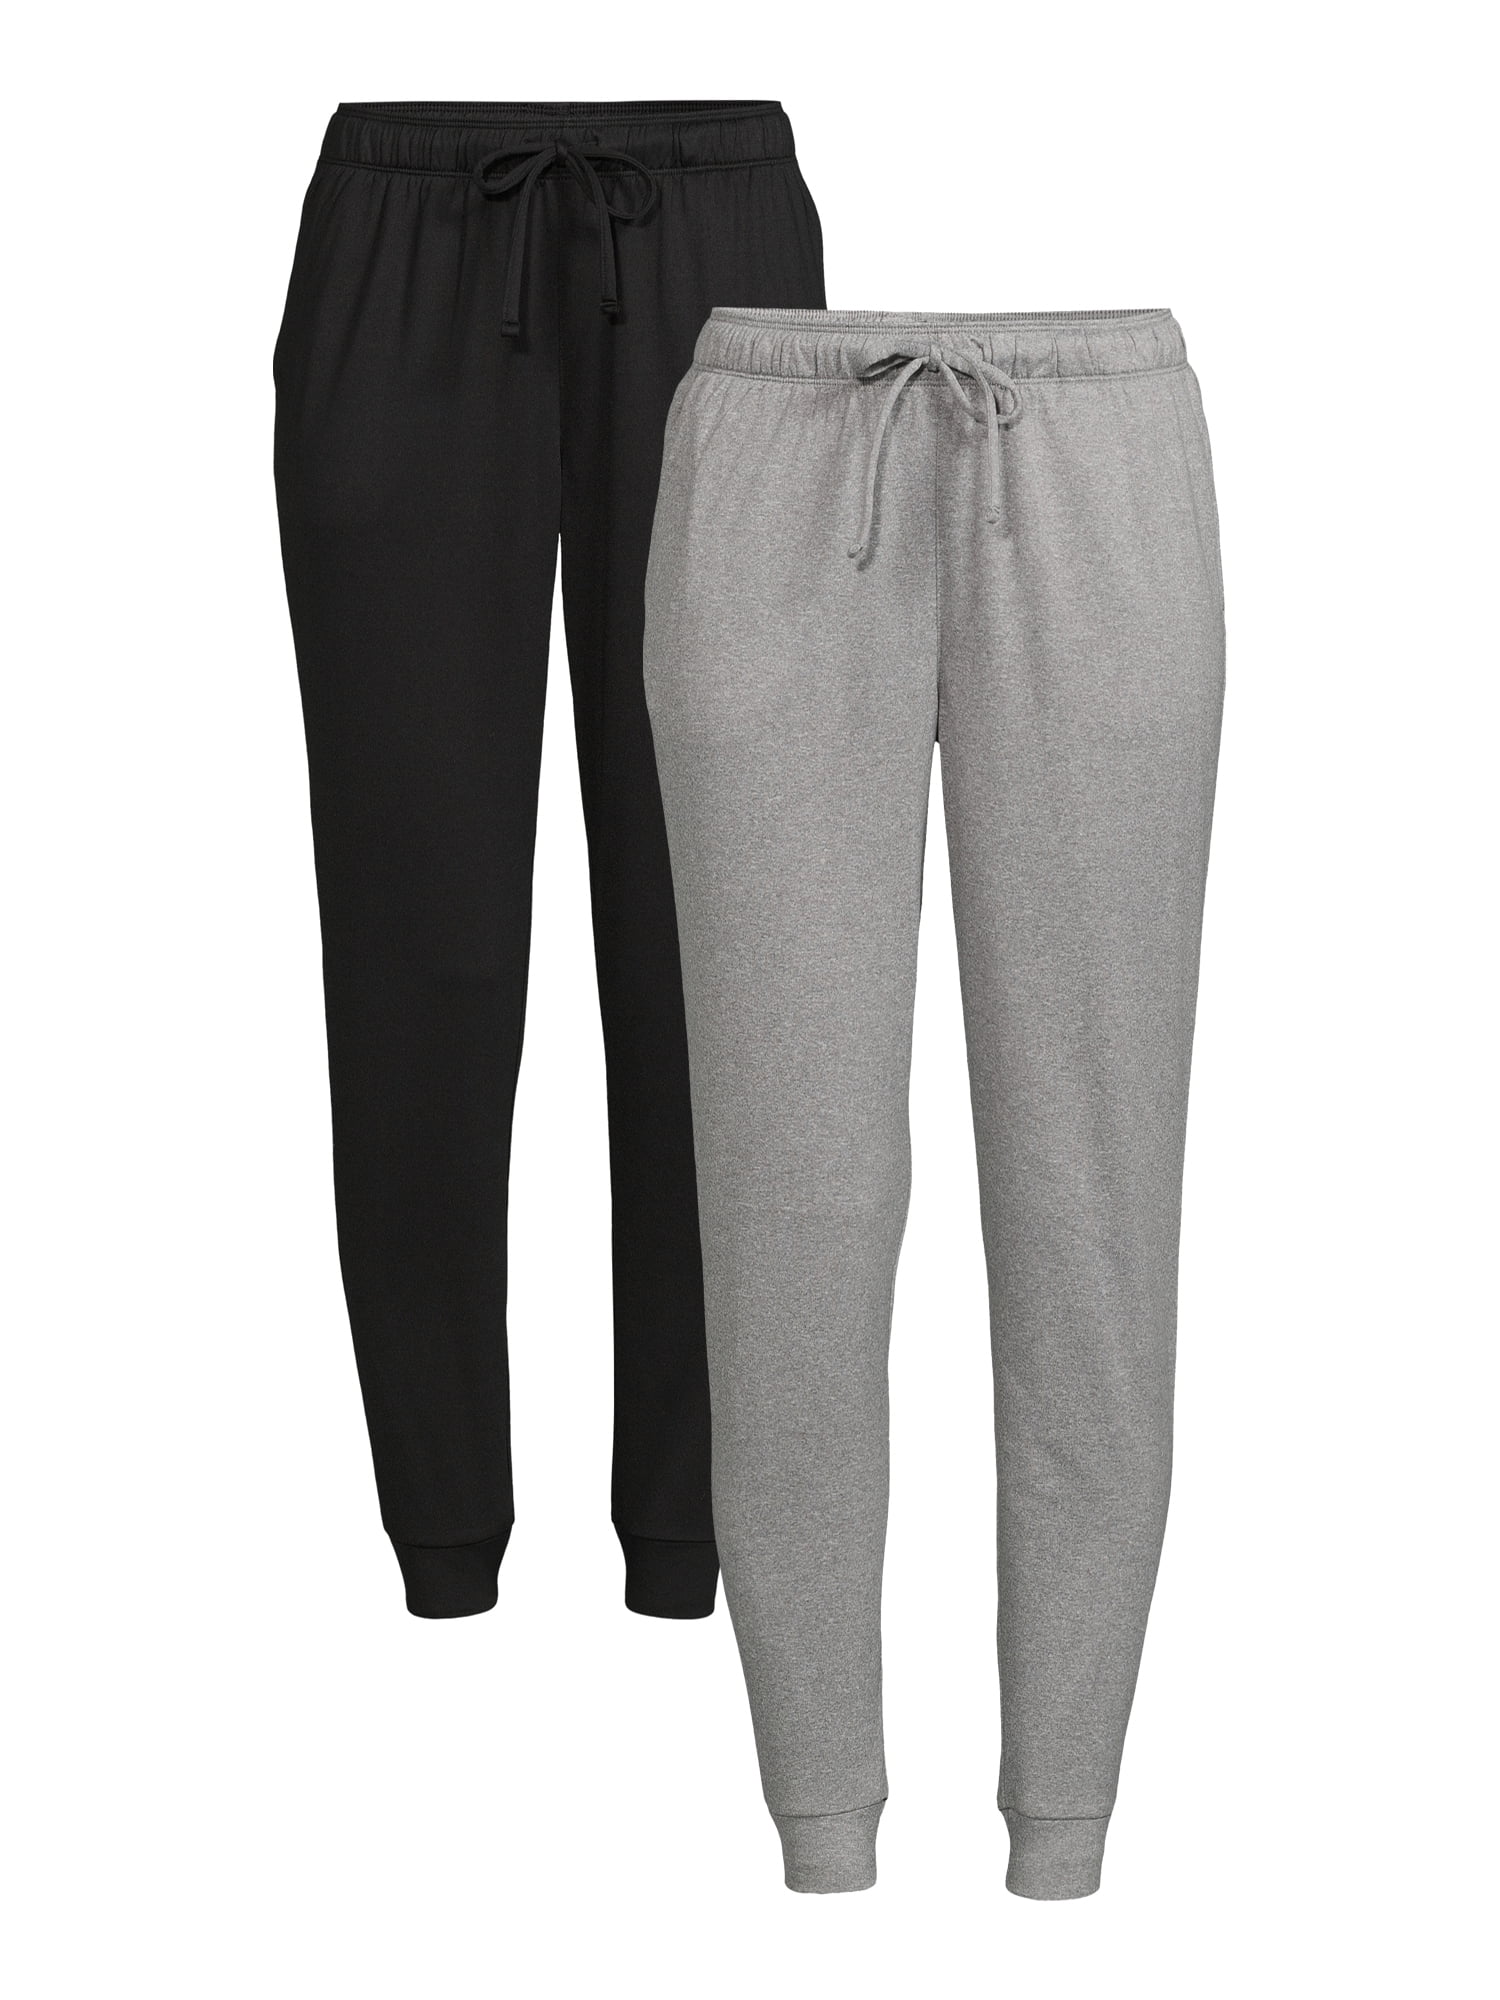 Athletic Works Women's Joggers, 2-Pack 